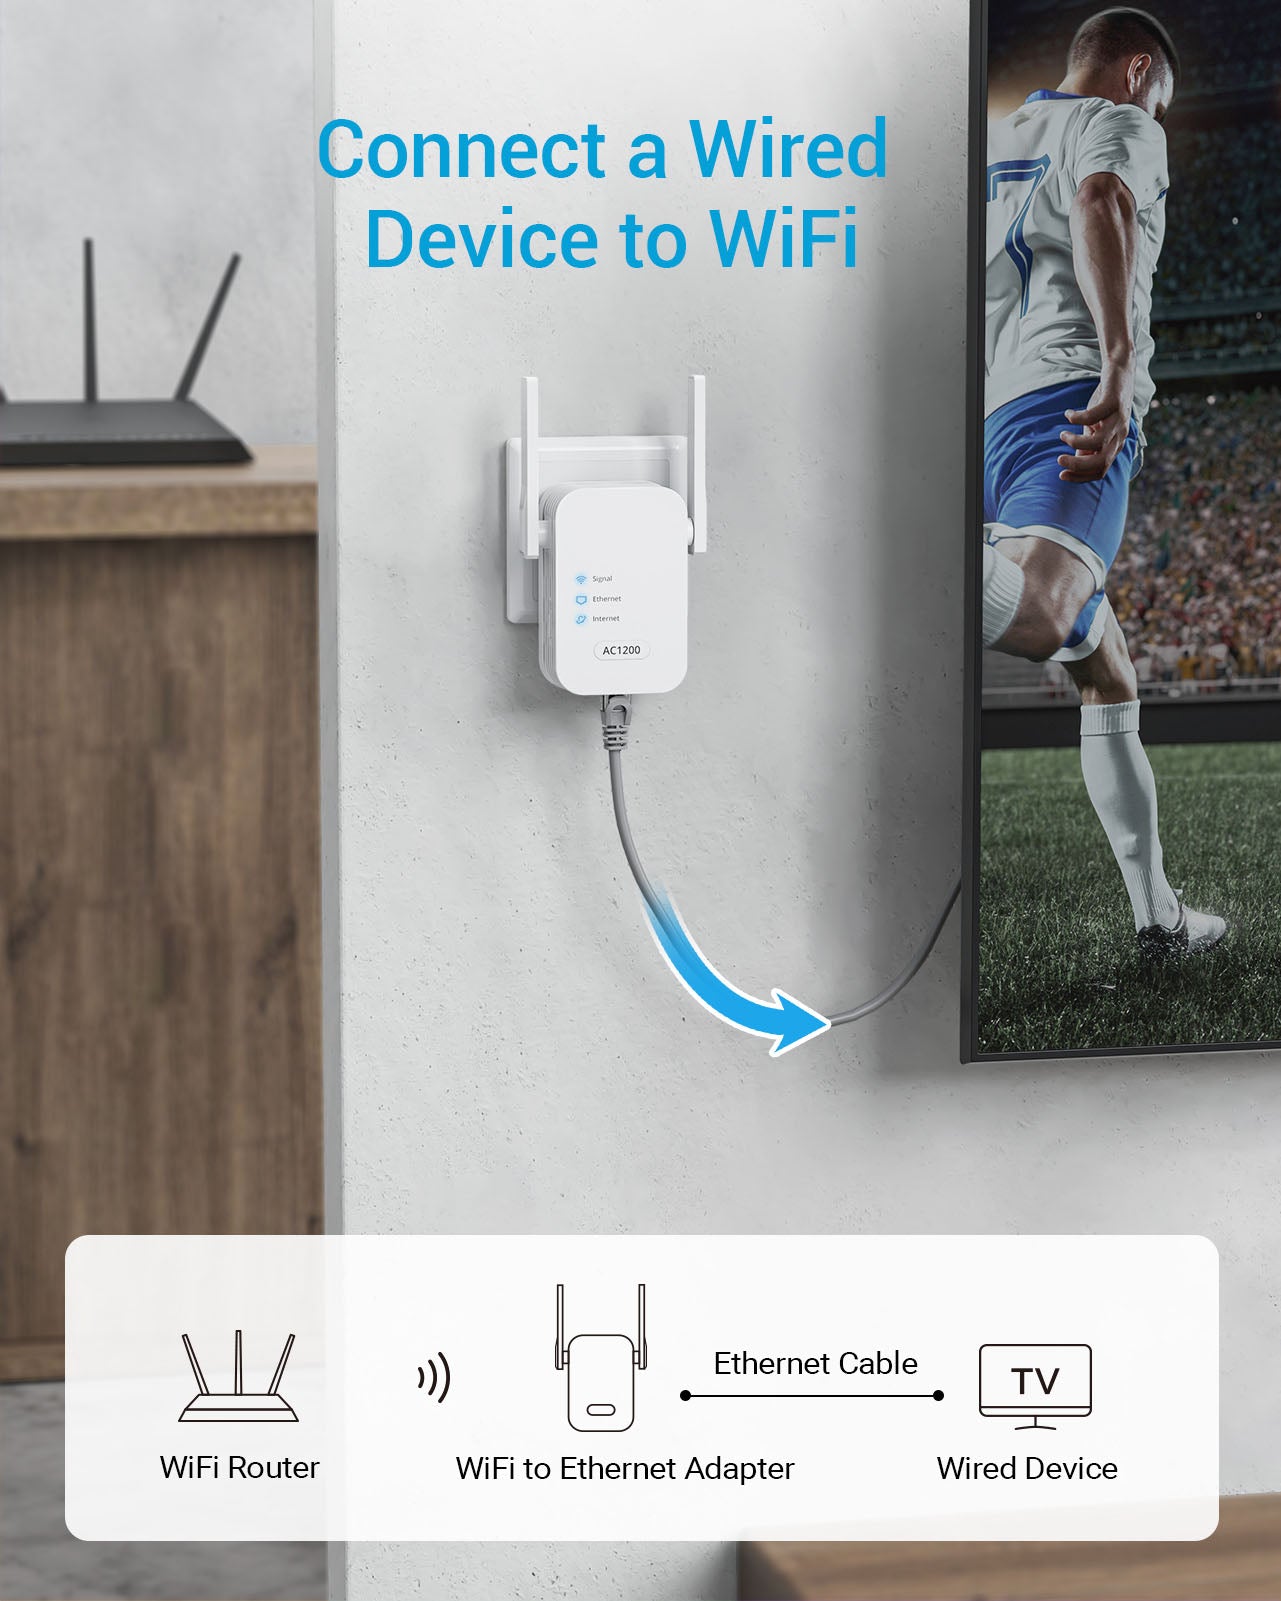 WiFi to Ethernet Adapter Connects to WiFi Router and Offers a Stable Connection to Your LAN-only Device